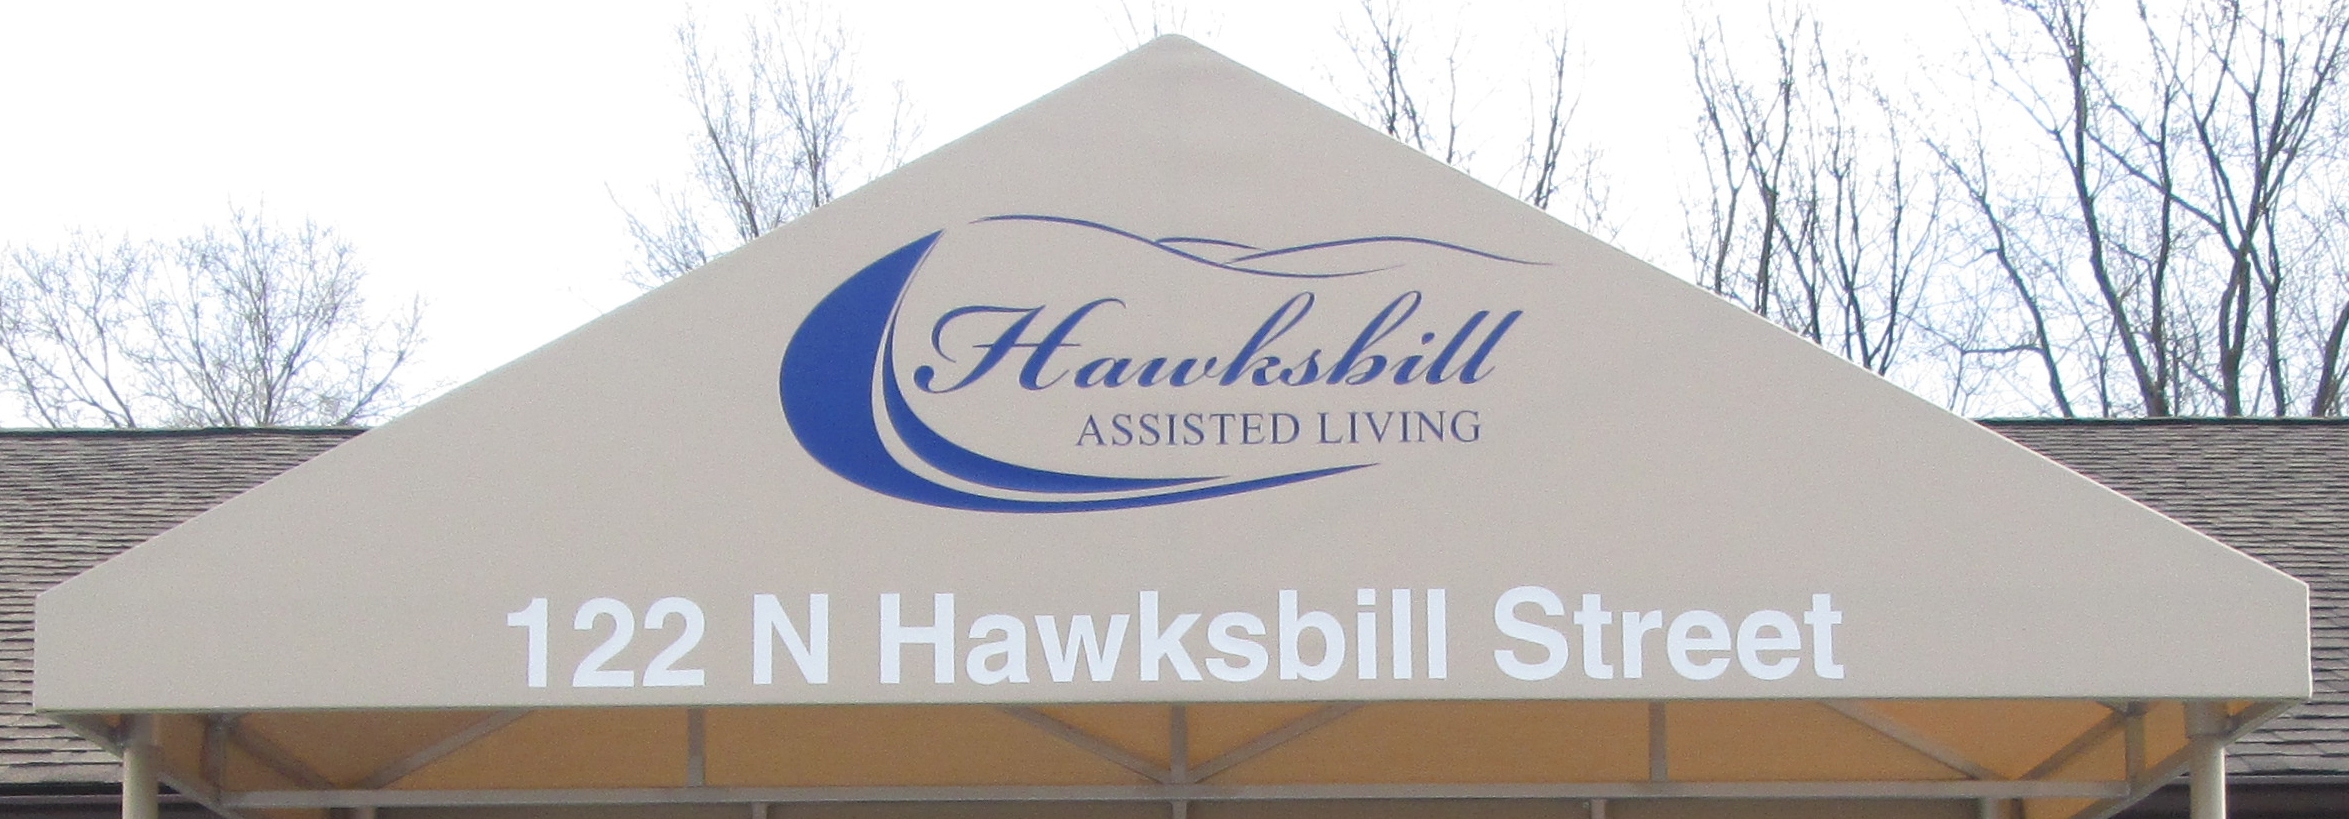 Hawksbill Assisted Living image